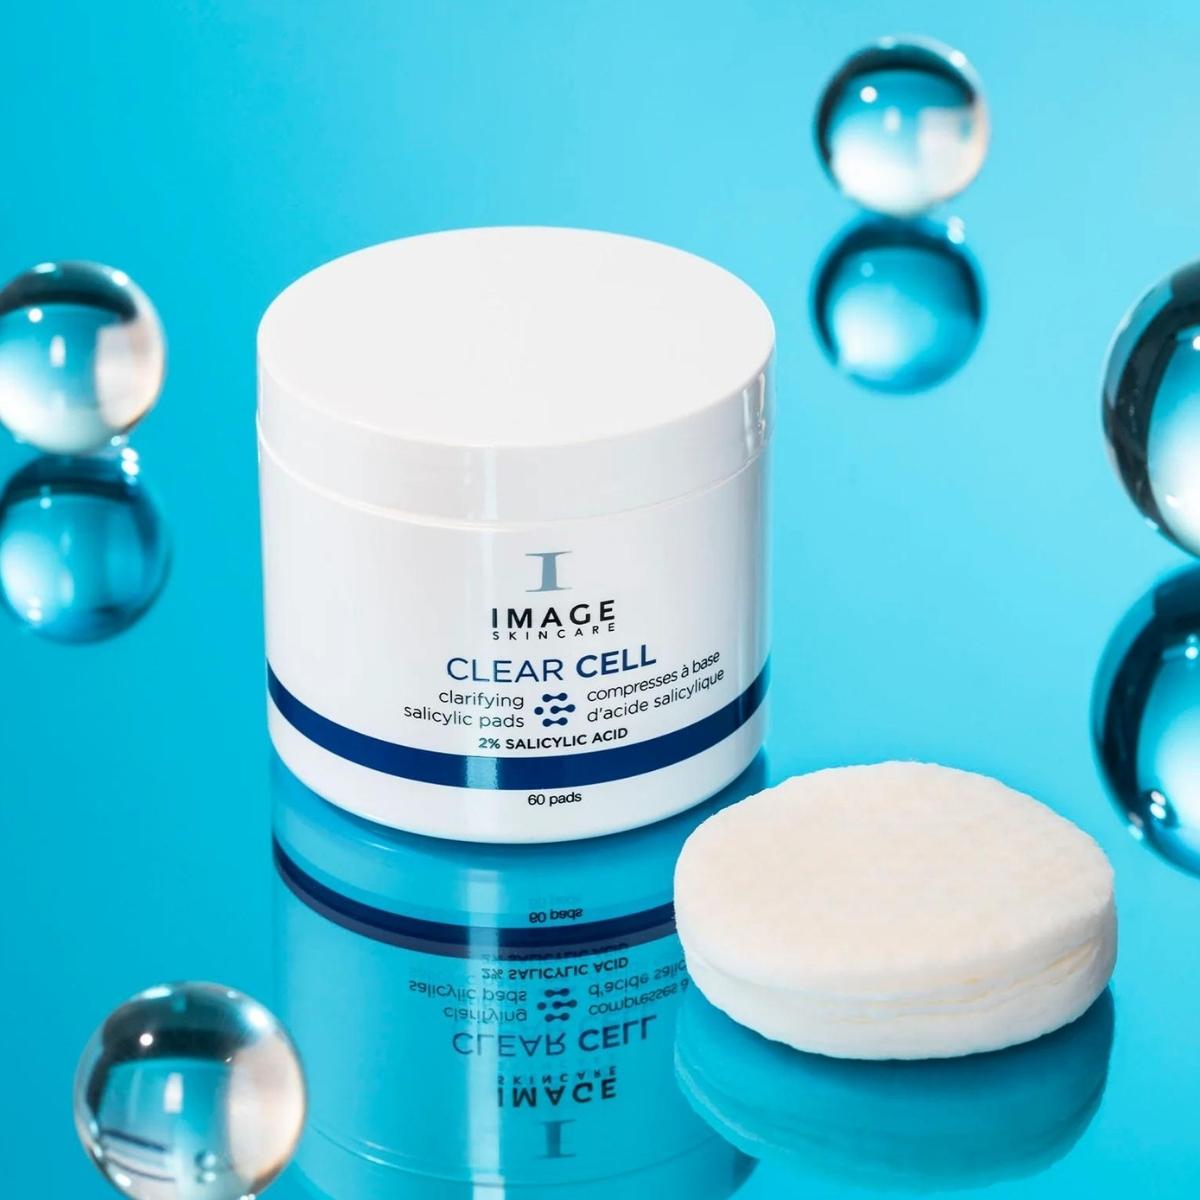 IMAGE Skincare Clear Cell Clarifying Pads with blue background 